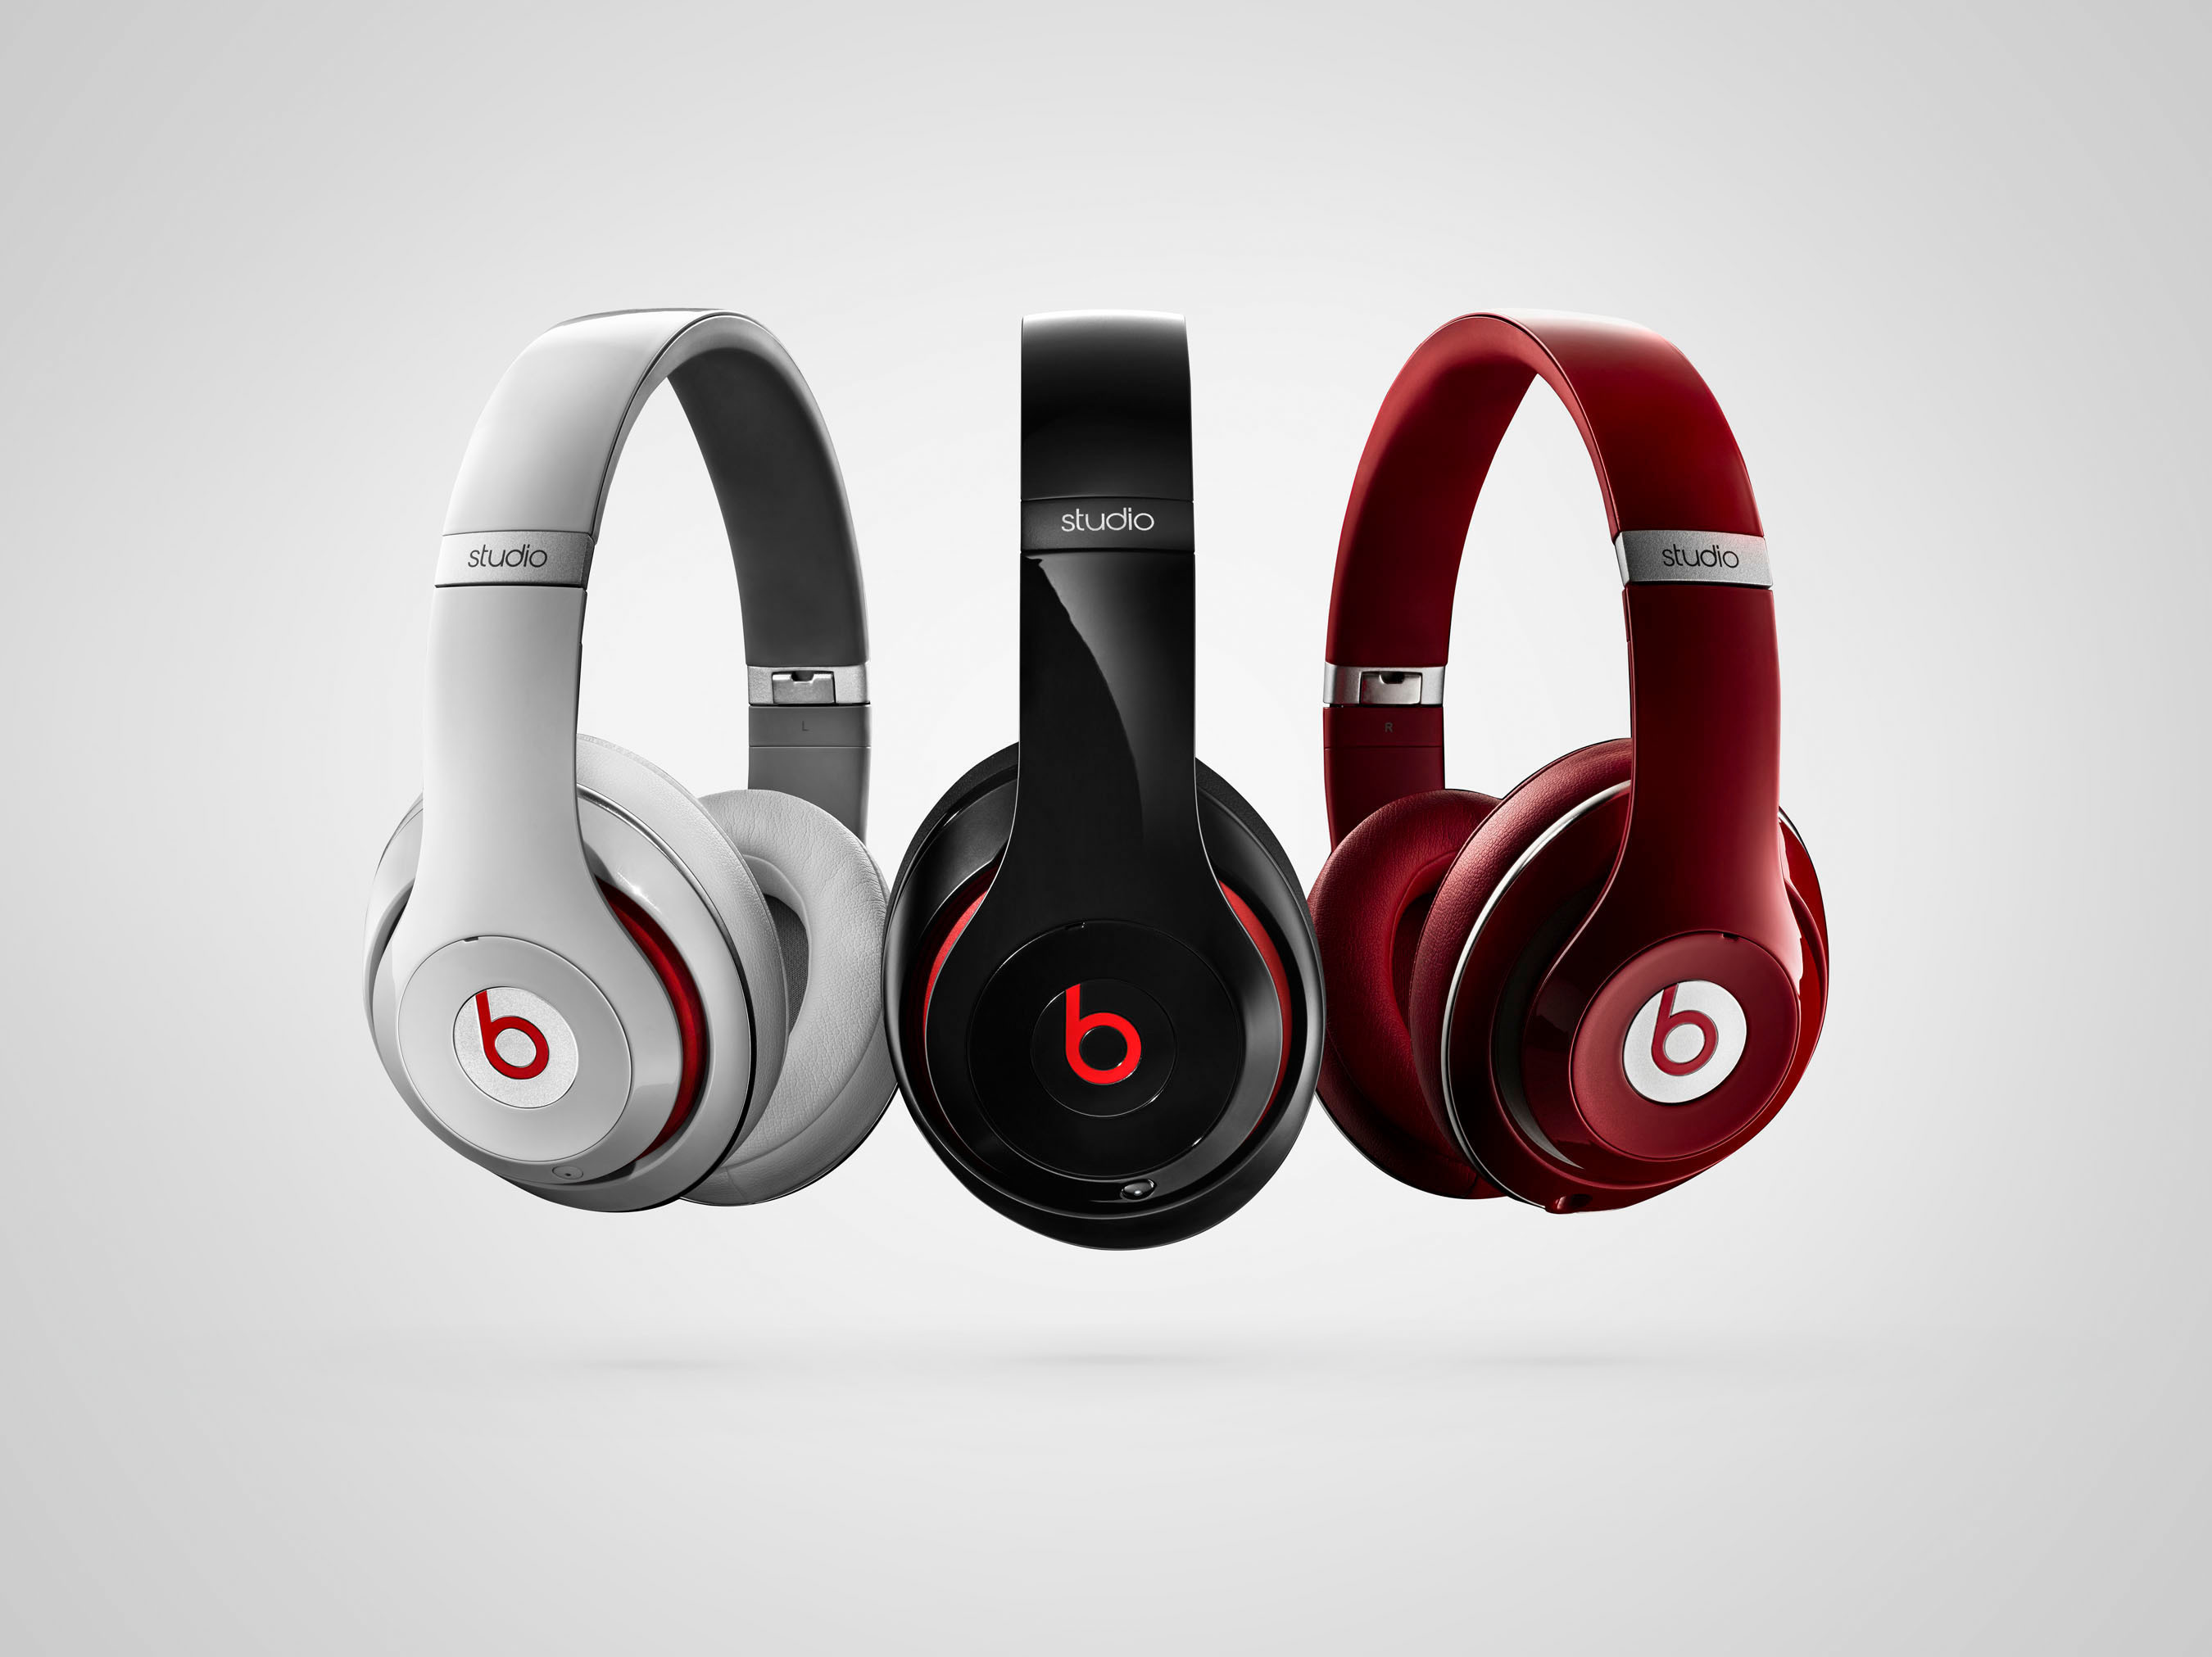 omfavne dateret en gang Beats By Dr. Dre Introduces the New Beats Studio: Redesigned and Reimagined